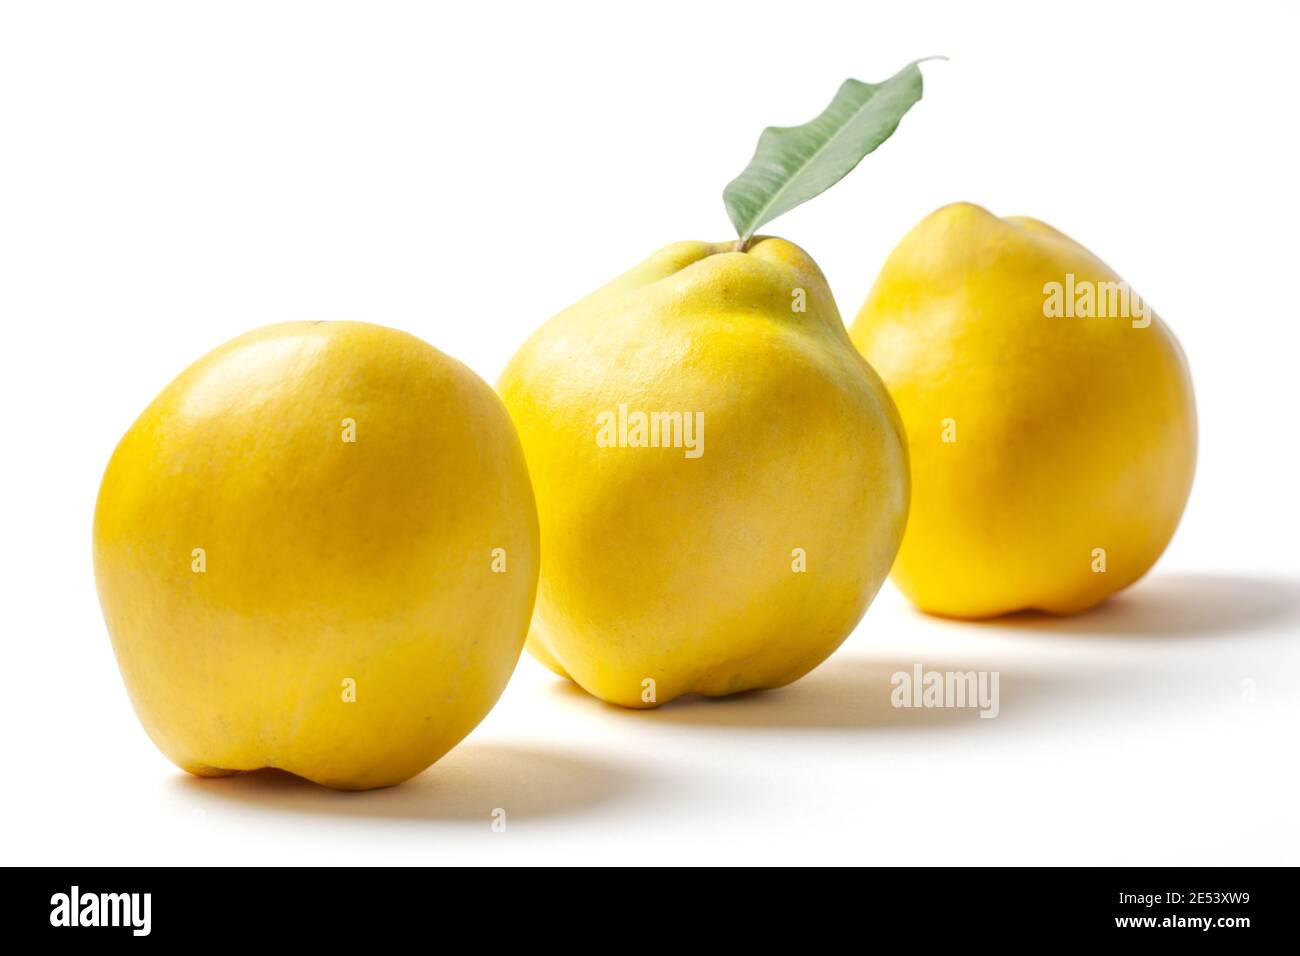 Three ripe yellow quinces isolated on white background. Stock Photo